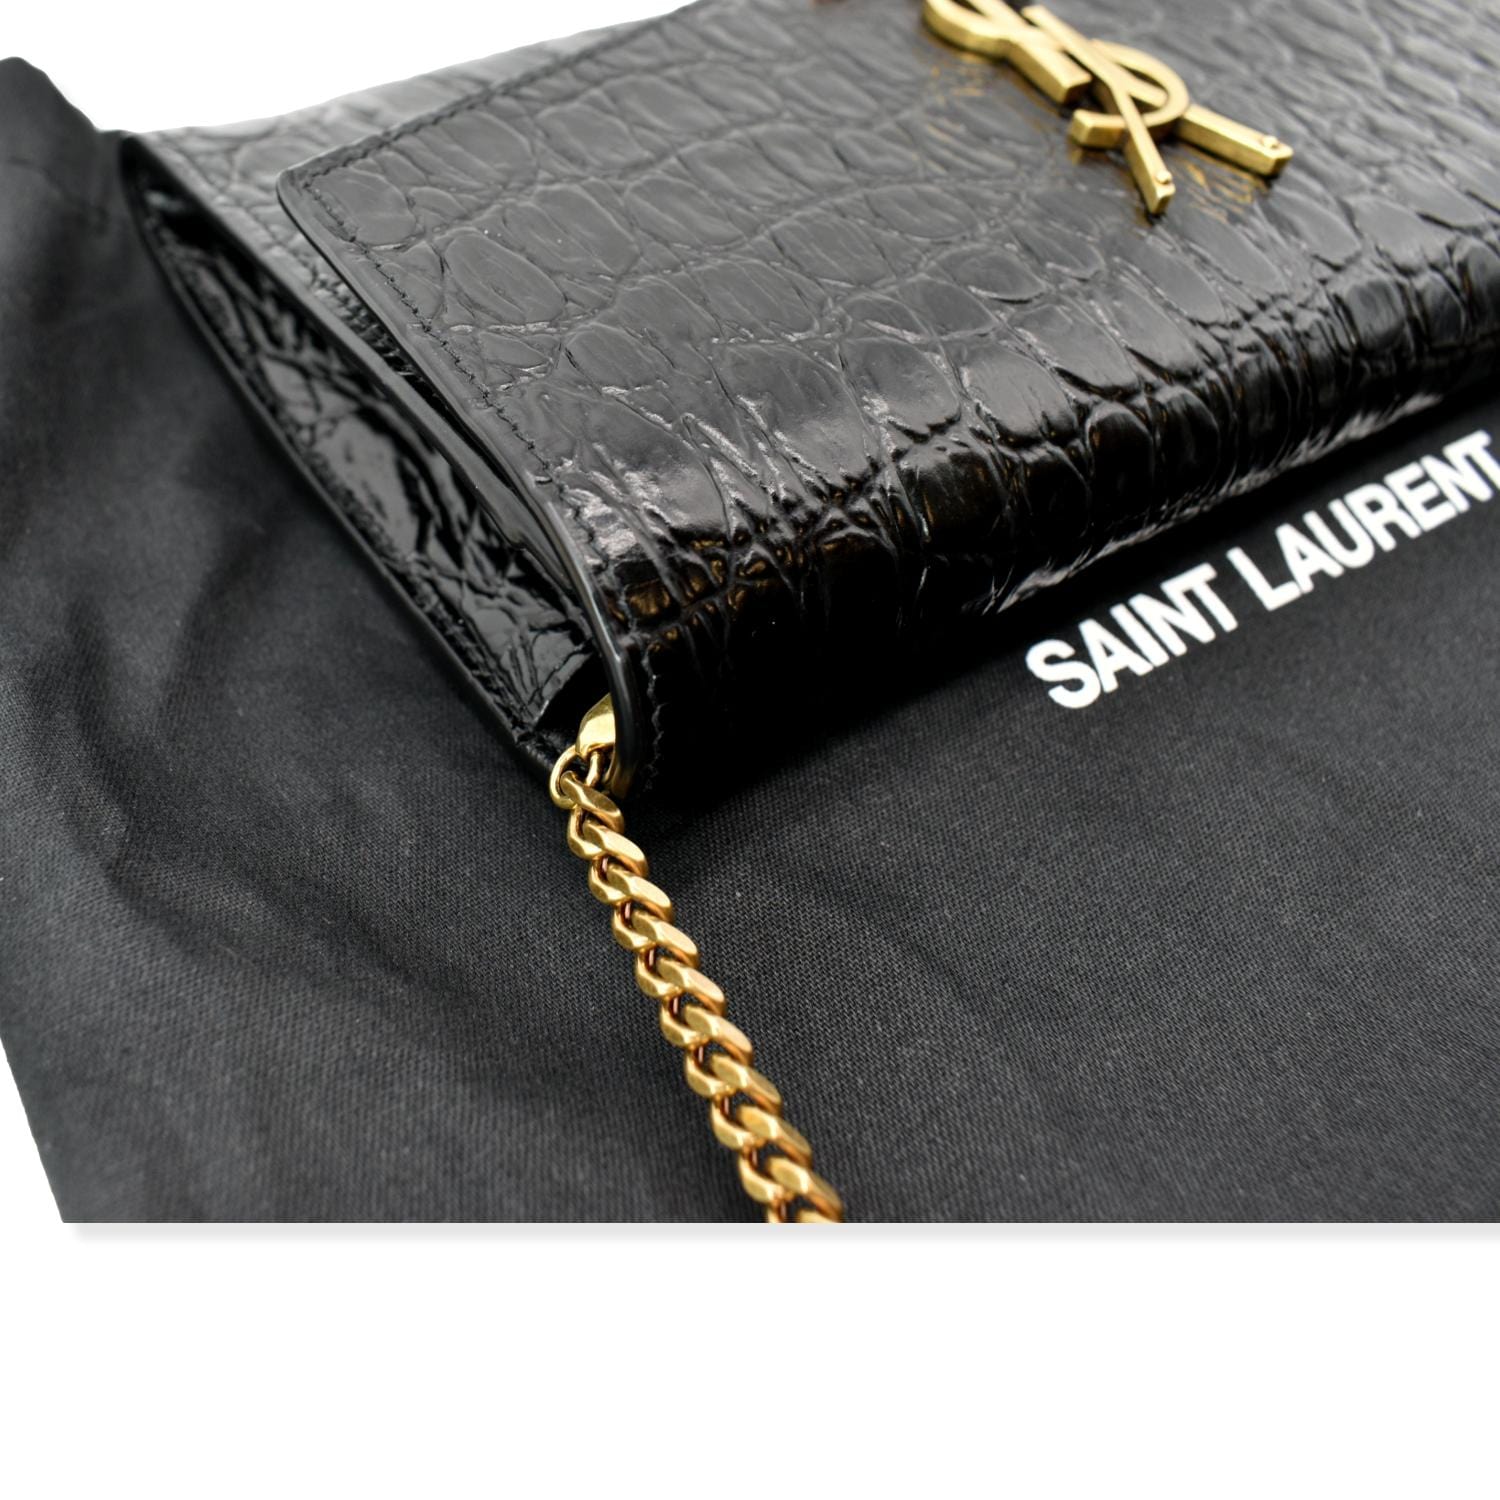 Authentic Saint Laurent Sunset Chain Wallet In Crocodile Embossed - YSL Bag